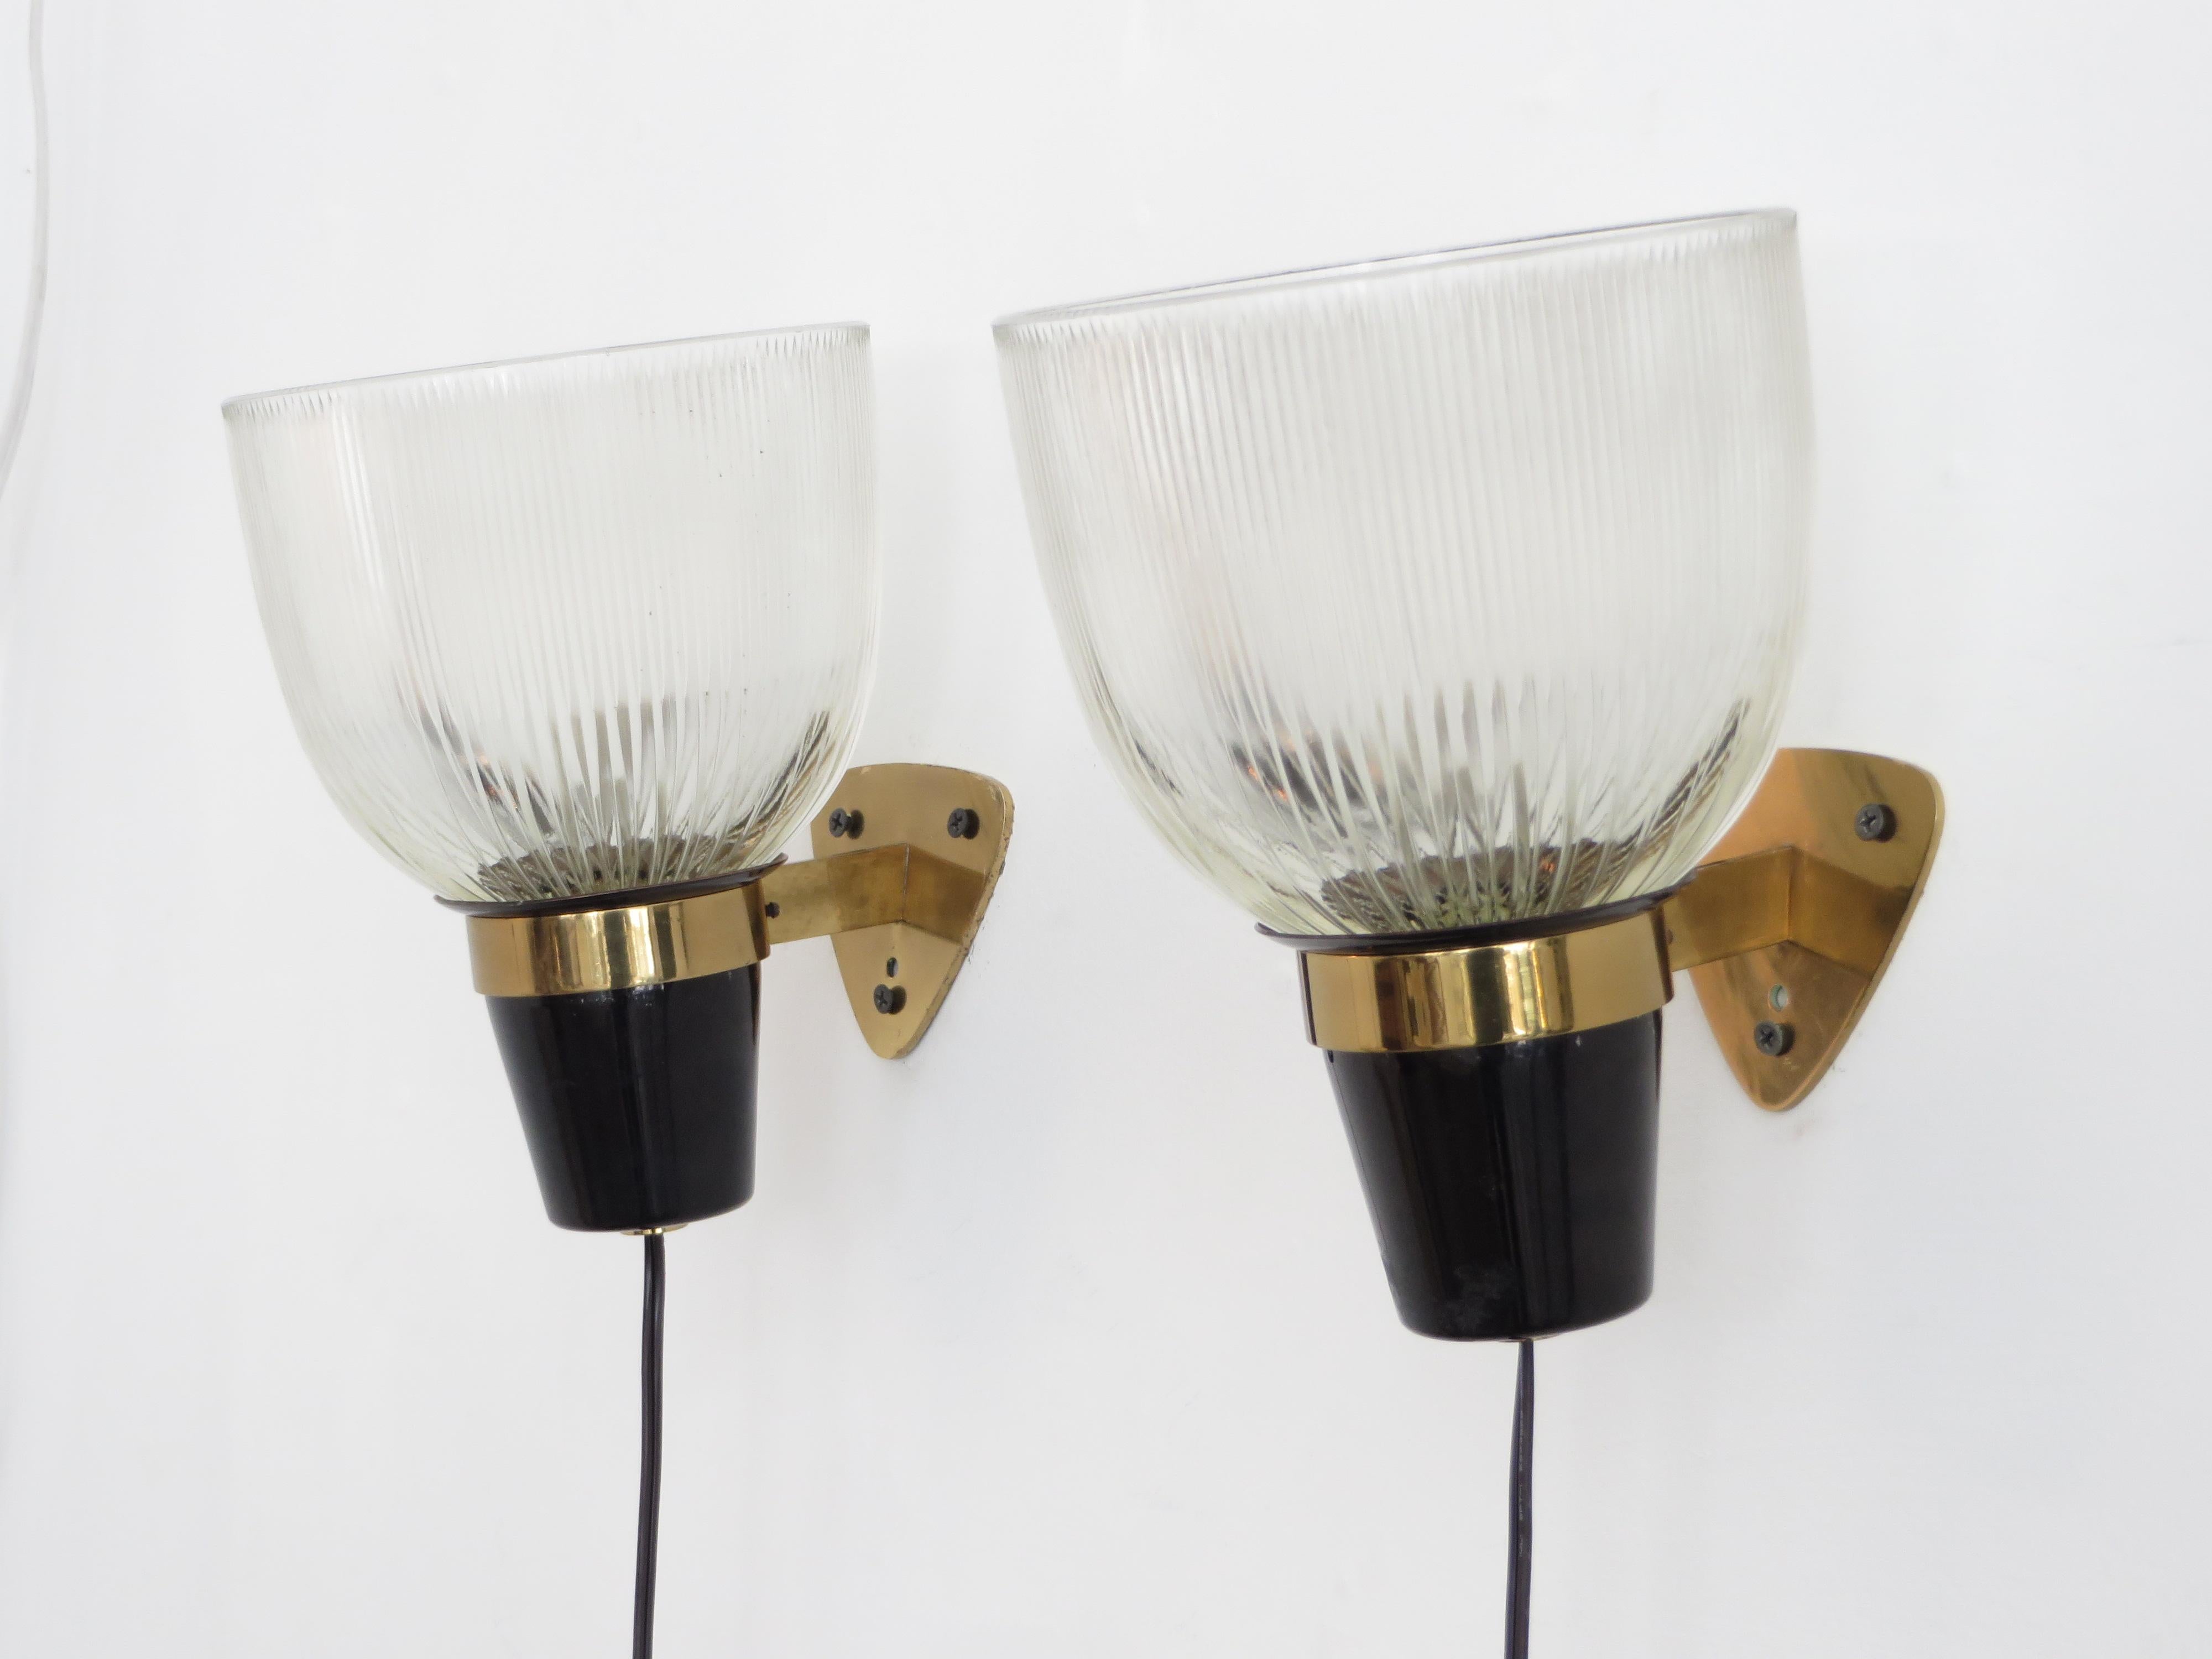 Architect and lighting designer Ignazio Gardella Italian sconces for Azucena.
Opaline Halophane pressed glass, black painted metal and brass arms, circa 1950.
This is a vintage pair and stamped Azucena on the back of the wall plate. Rewired for